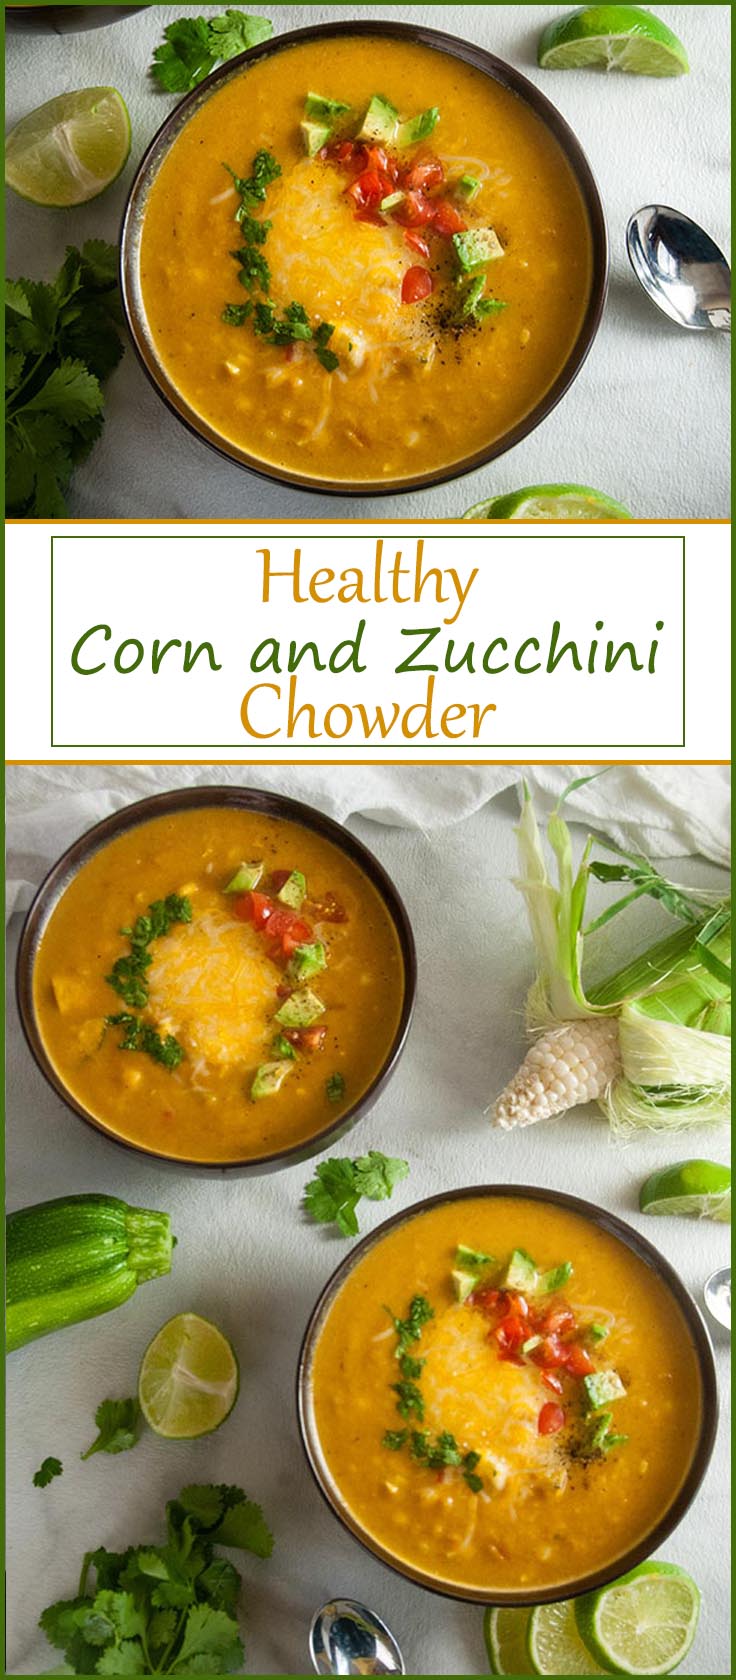 Healthy End of Summer Corn and Zucchini Chowder with Sweet Potato, Cauliflower, and Bell Peppers from www.SeasonedSprinkles.com